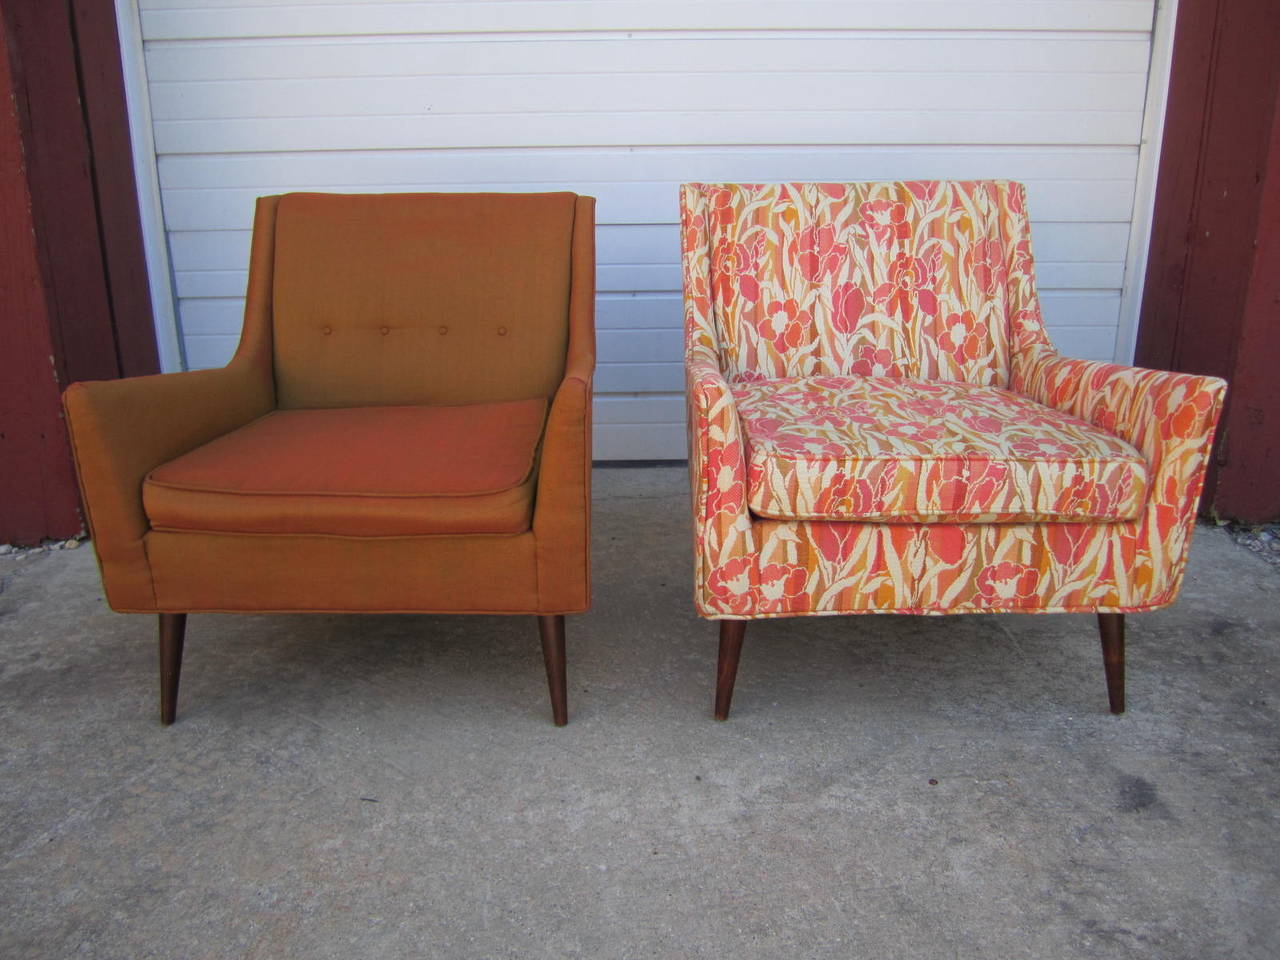 Lovely pair of Milo Baughman style lounge chairs plus one matching ottoman. These chairs are perfect for the designer who needs to re-upholster as you can see they have mismatched fabric. We love the scale of these being not too big nor too small. I